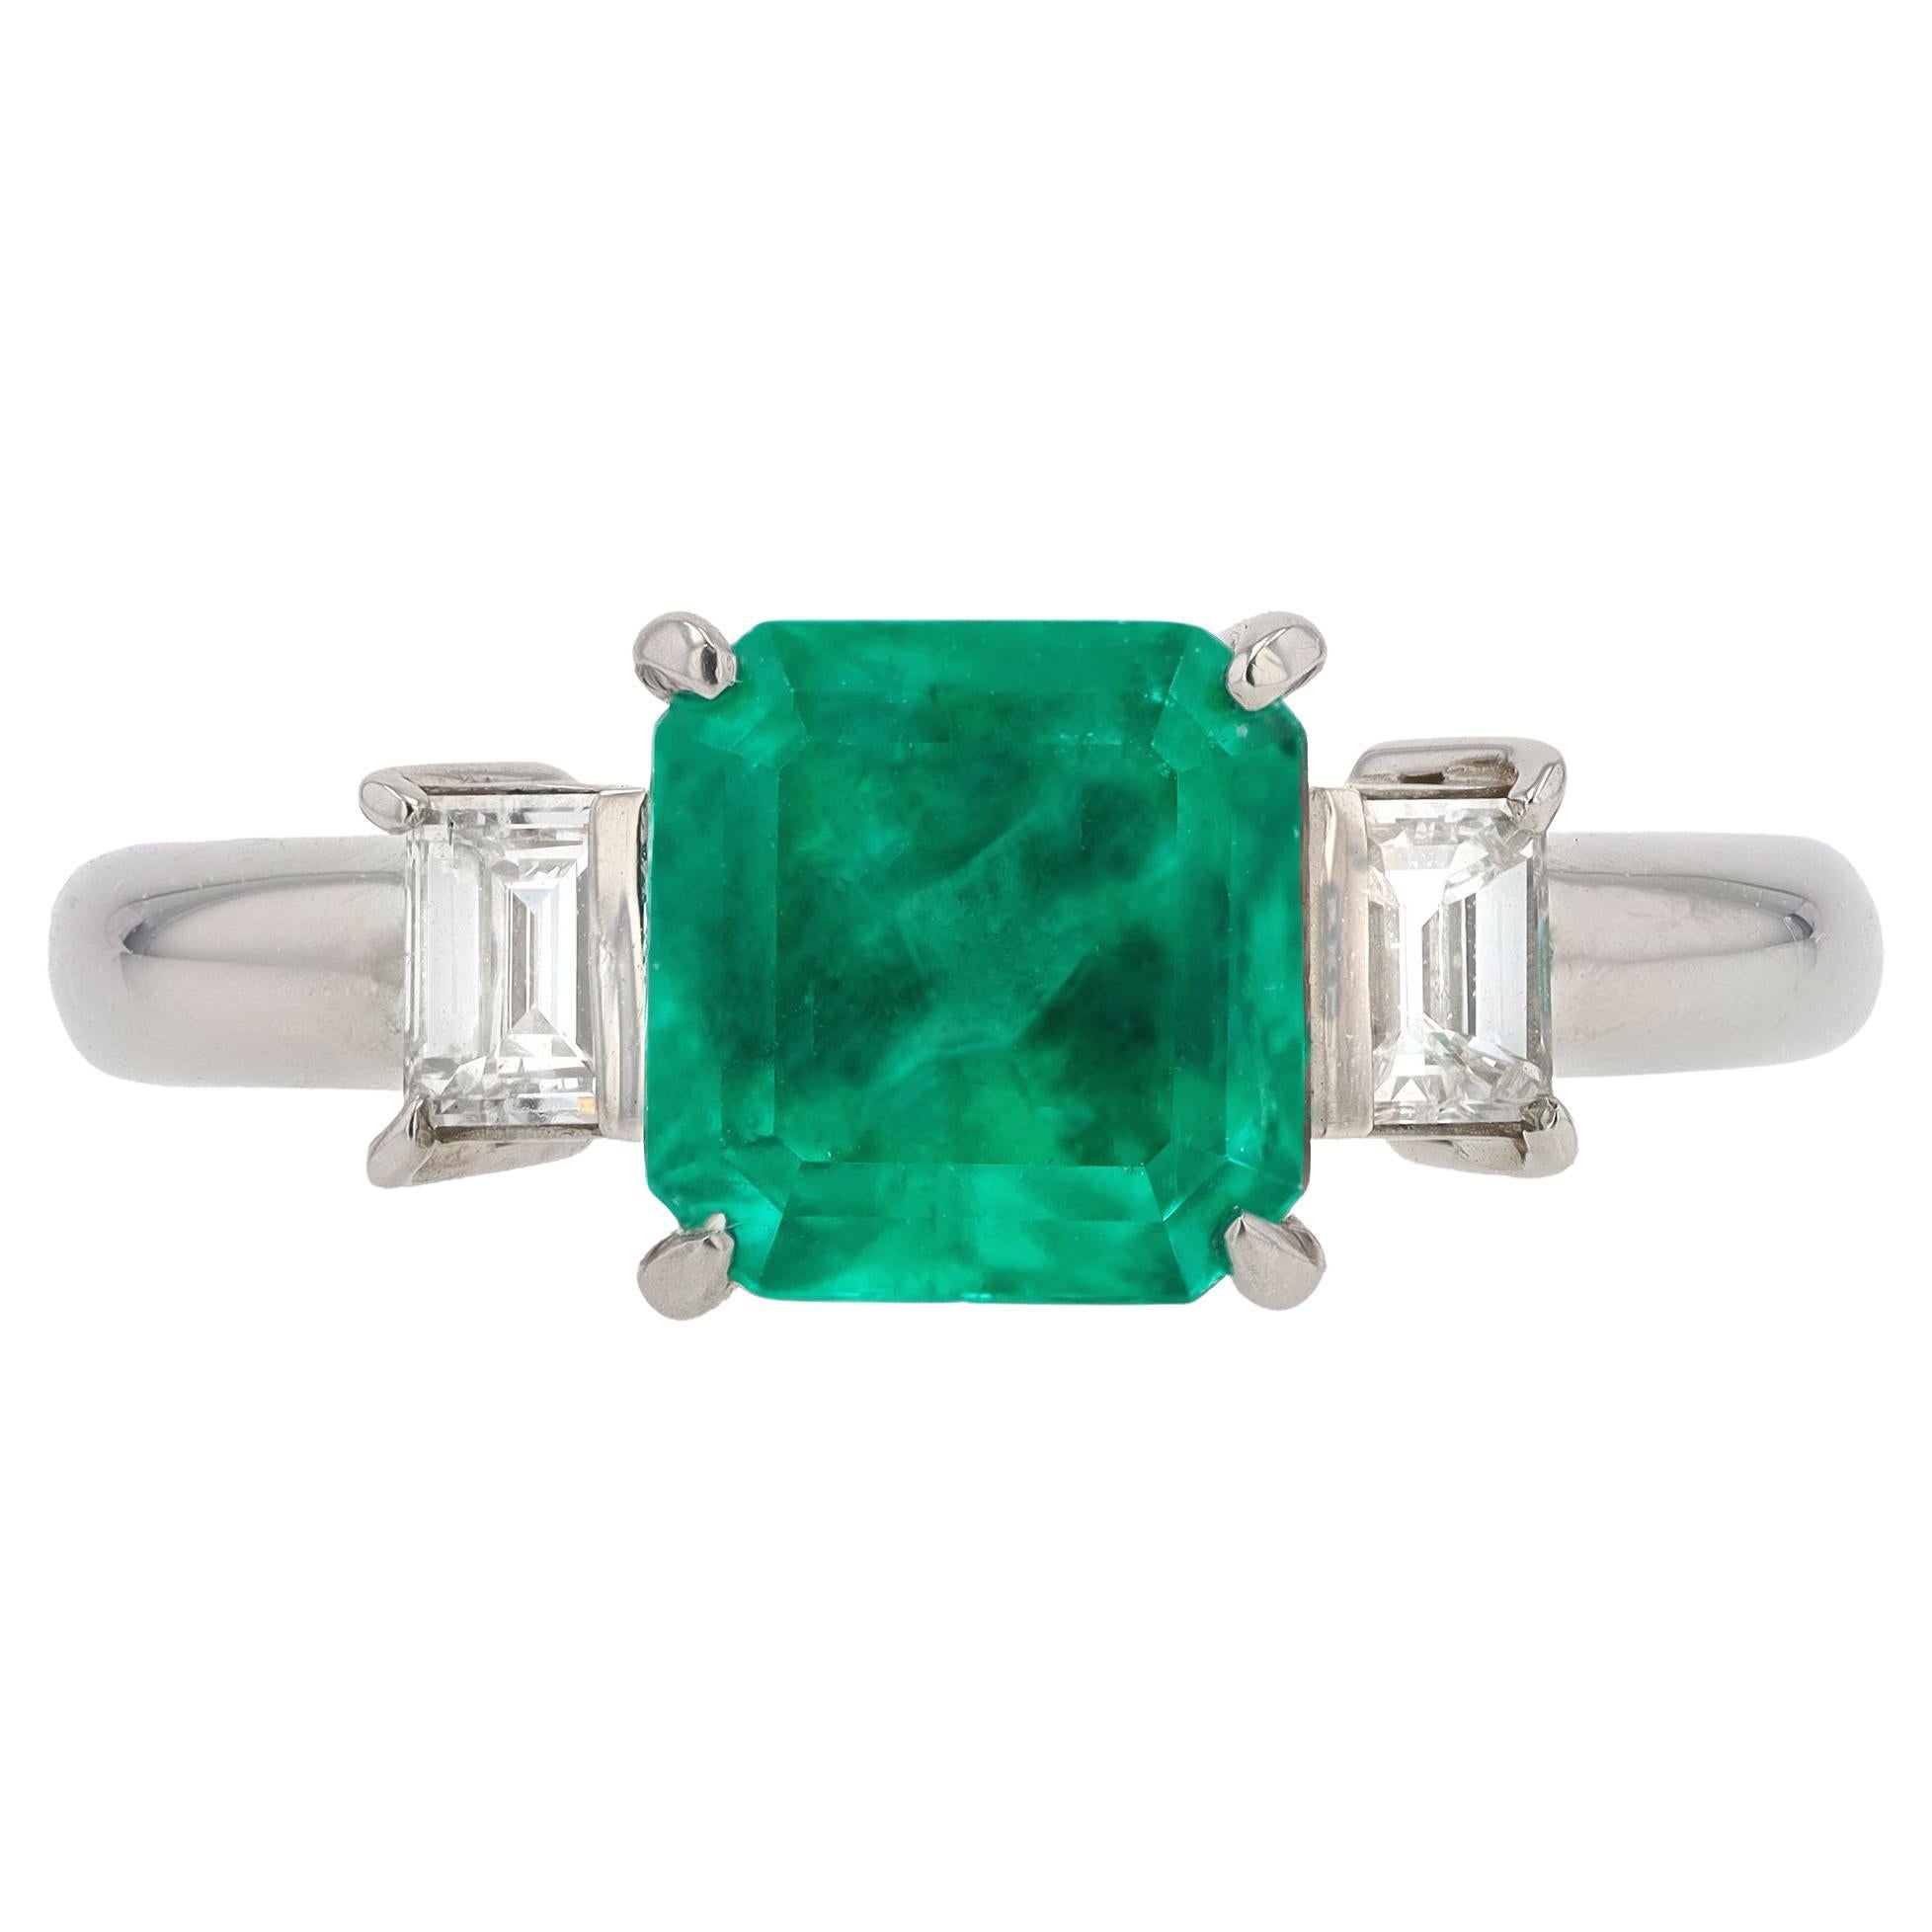 Vintage 1970s Estate GIA Certified Colombian 1.69 Carat Emerald and Diamond Ring For Sale